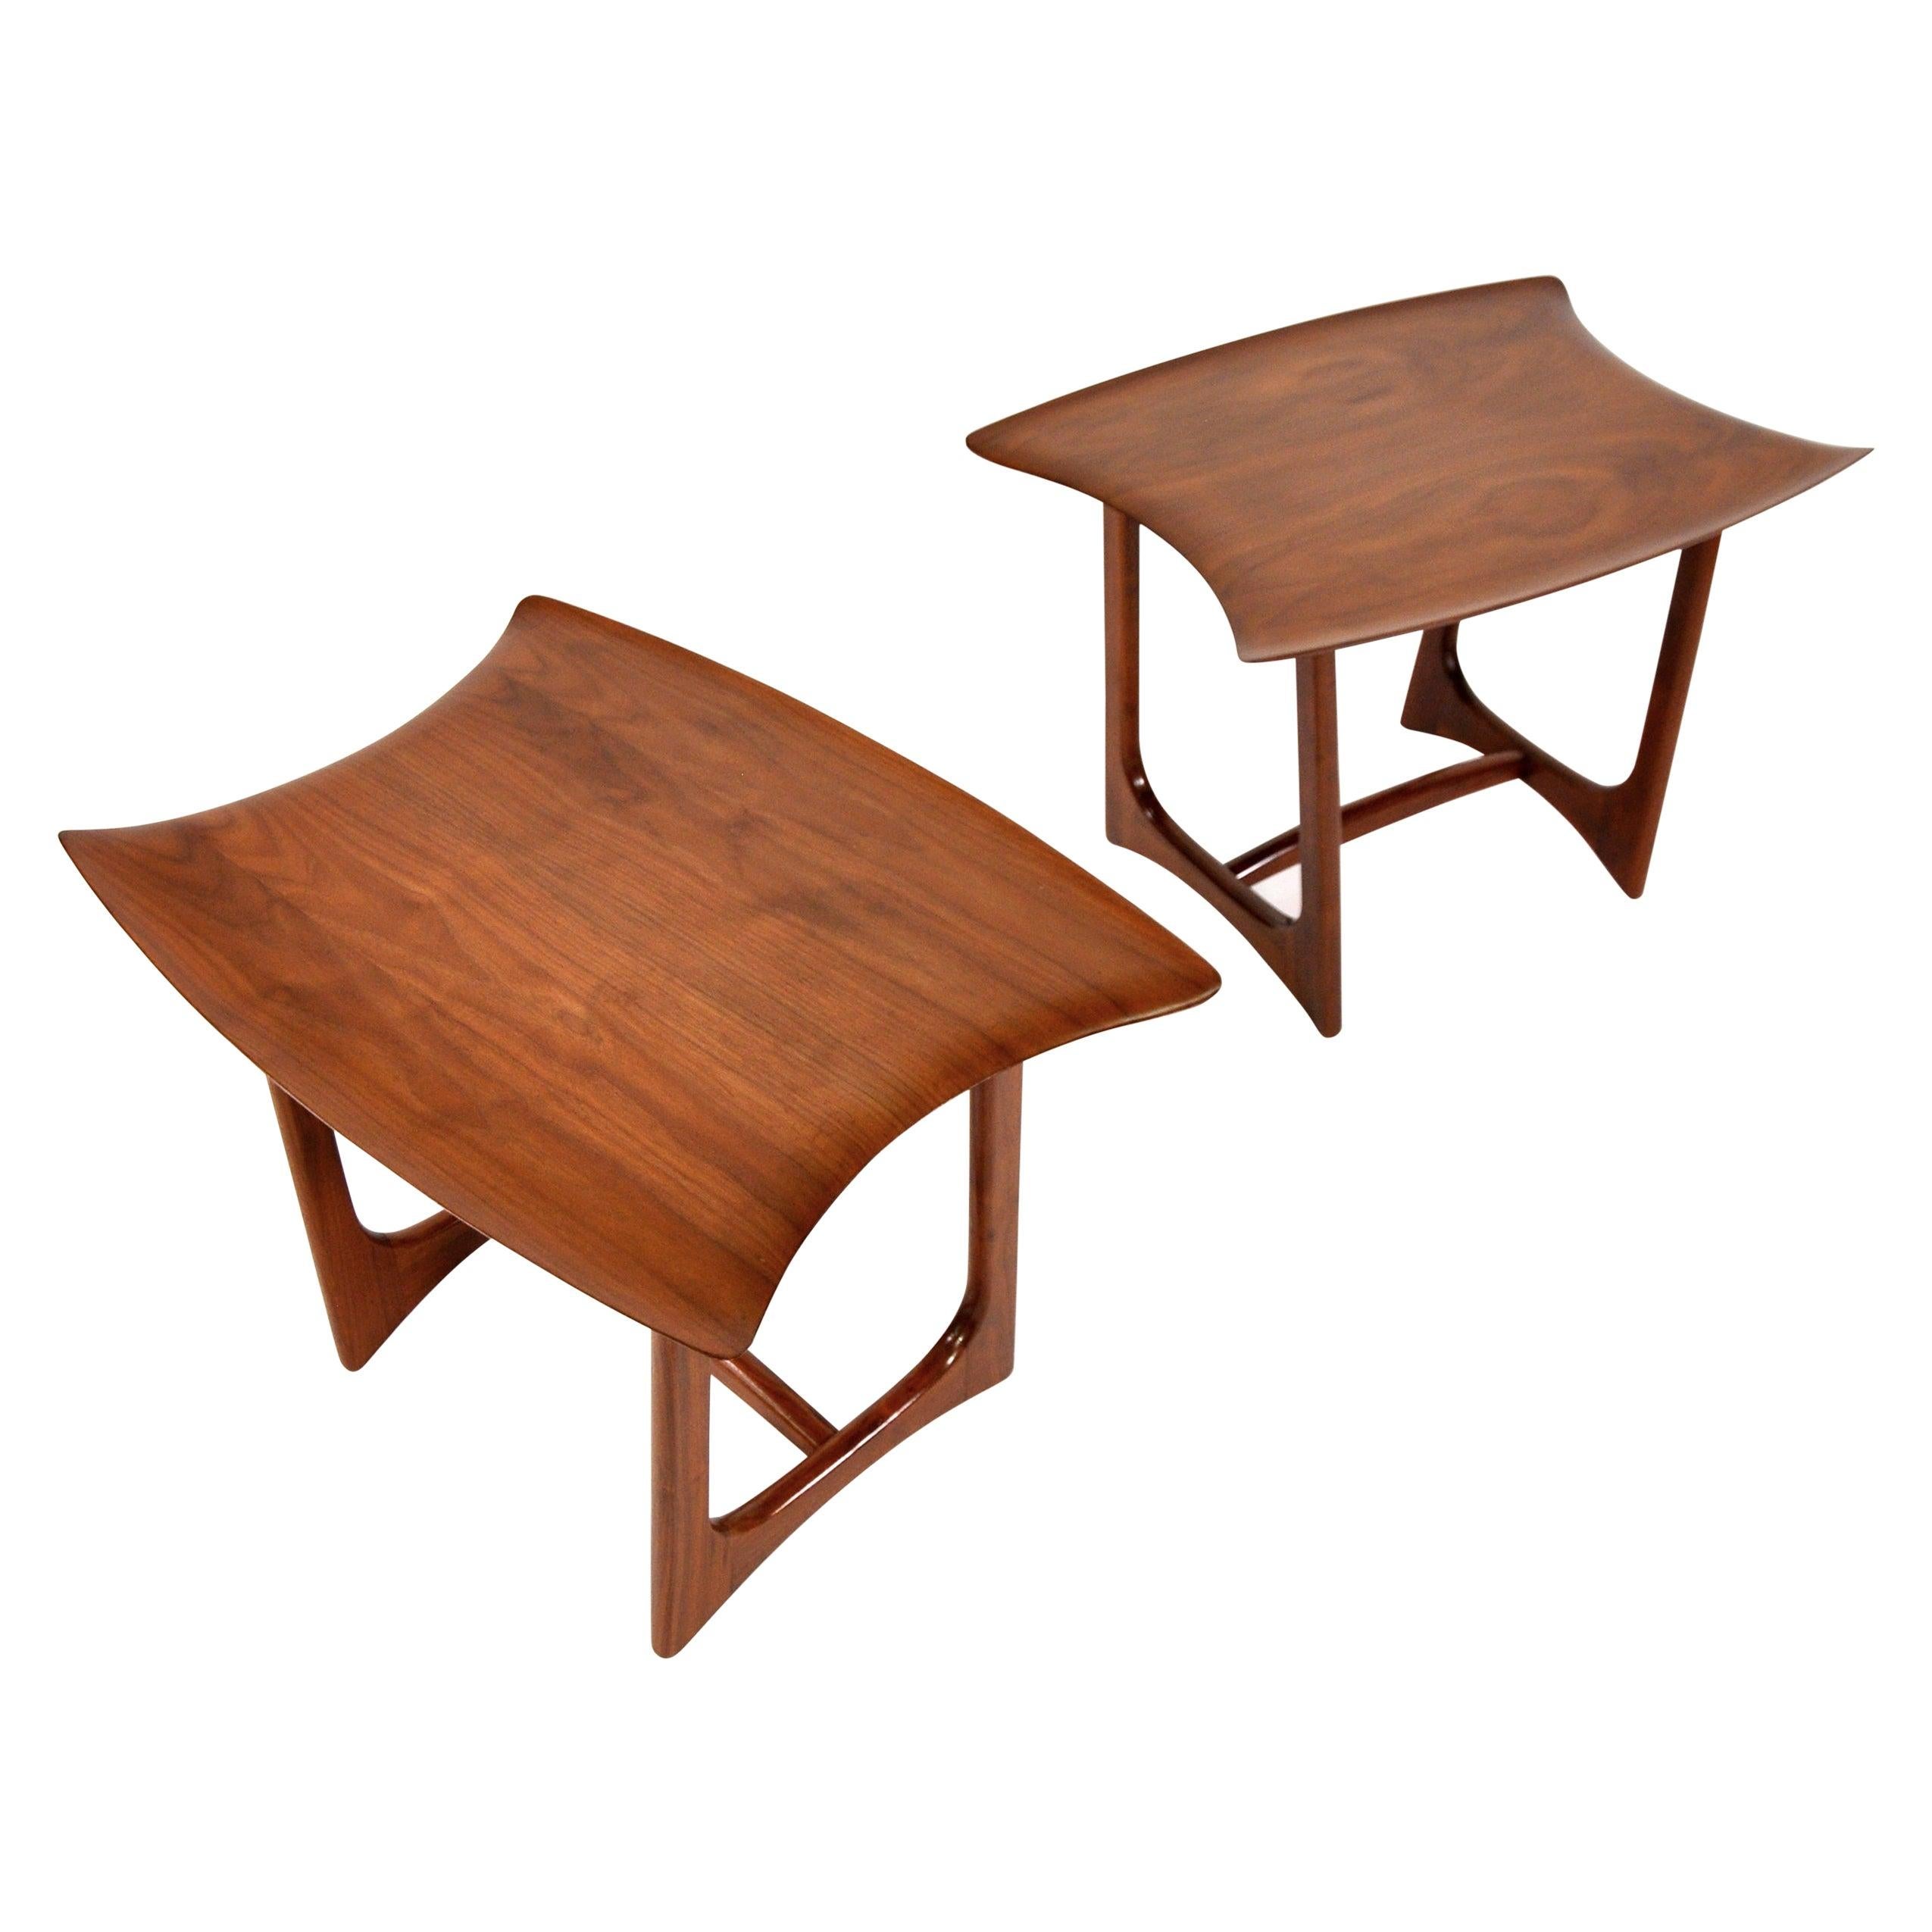 Pair of Adrian Pearsall Walnut Stingray Tables by Craft Associates, 1950s